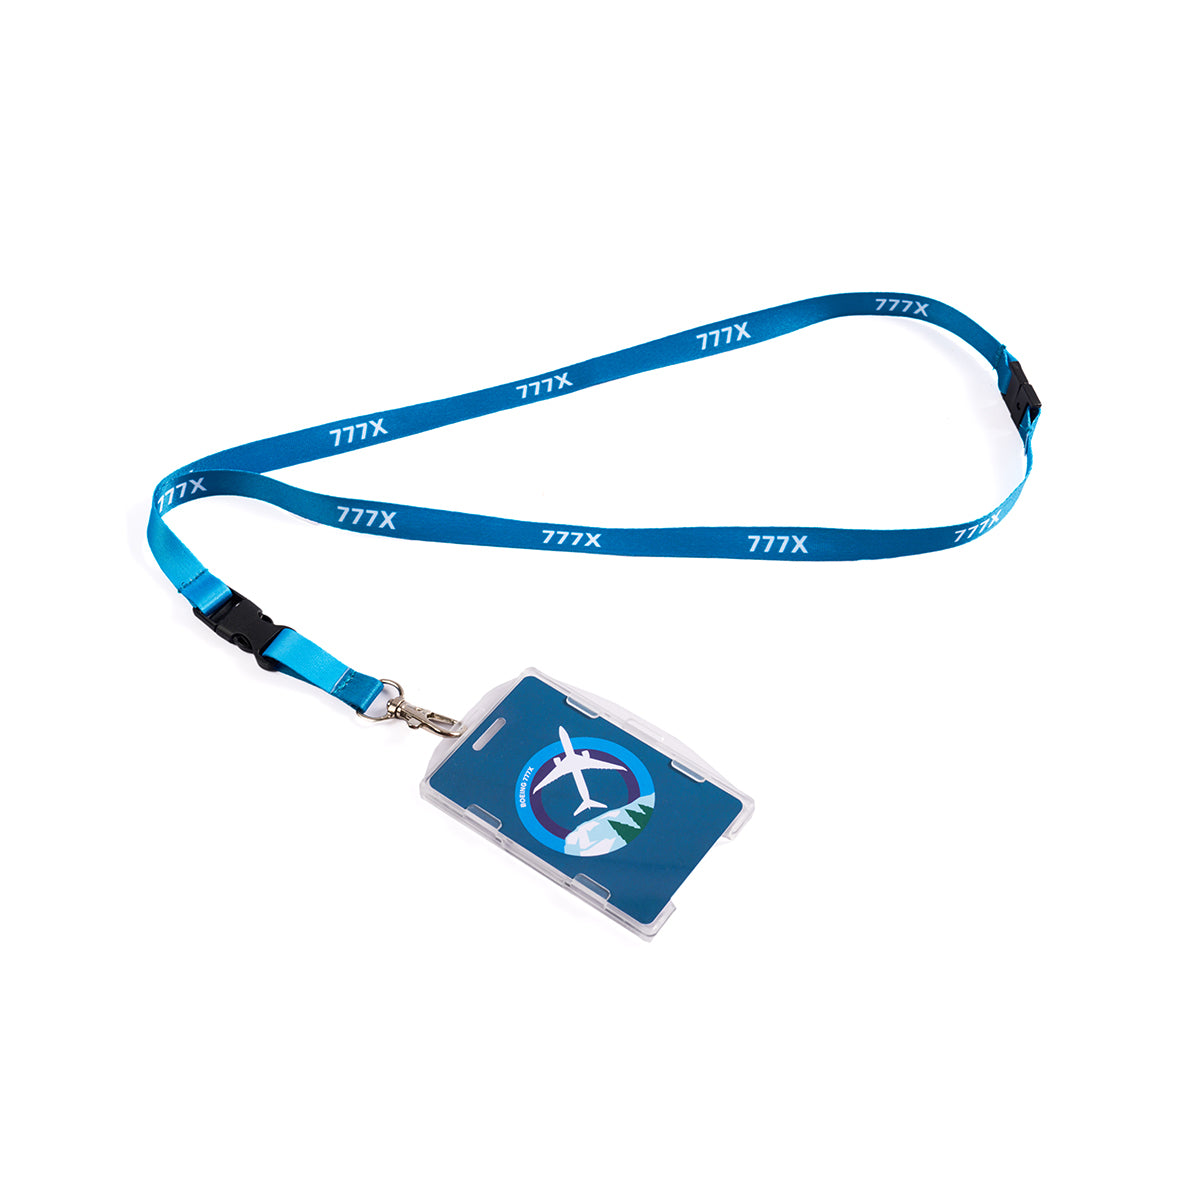 Full product image of the lanyard in blue. Boeing 777X Skyward sublimation print. Full printed PVC card with Boeing 777X Skyward roundel design.